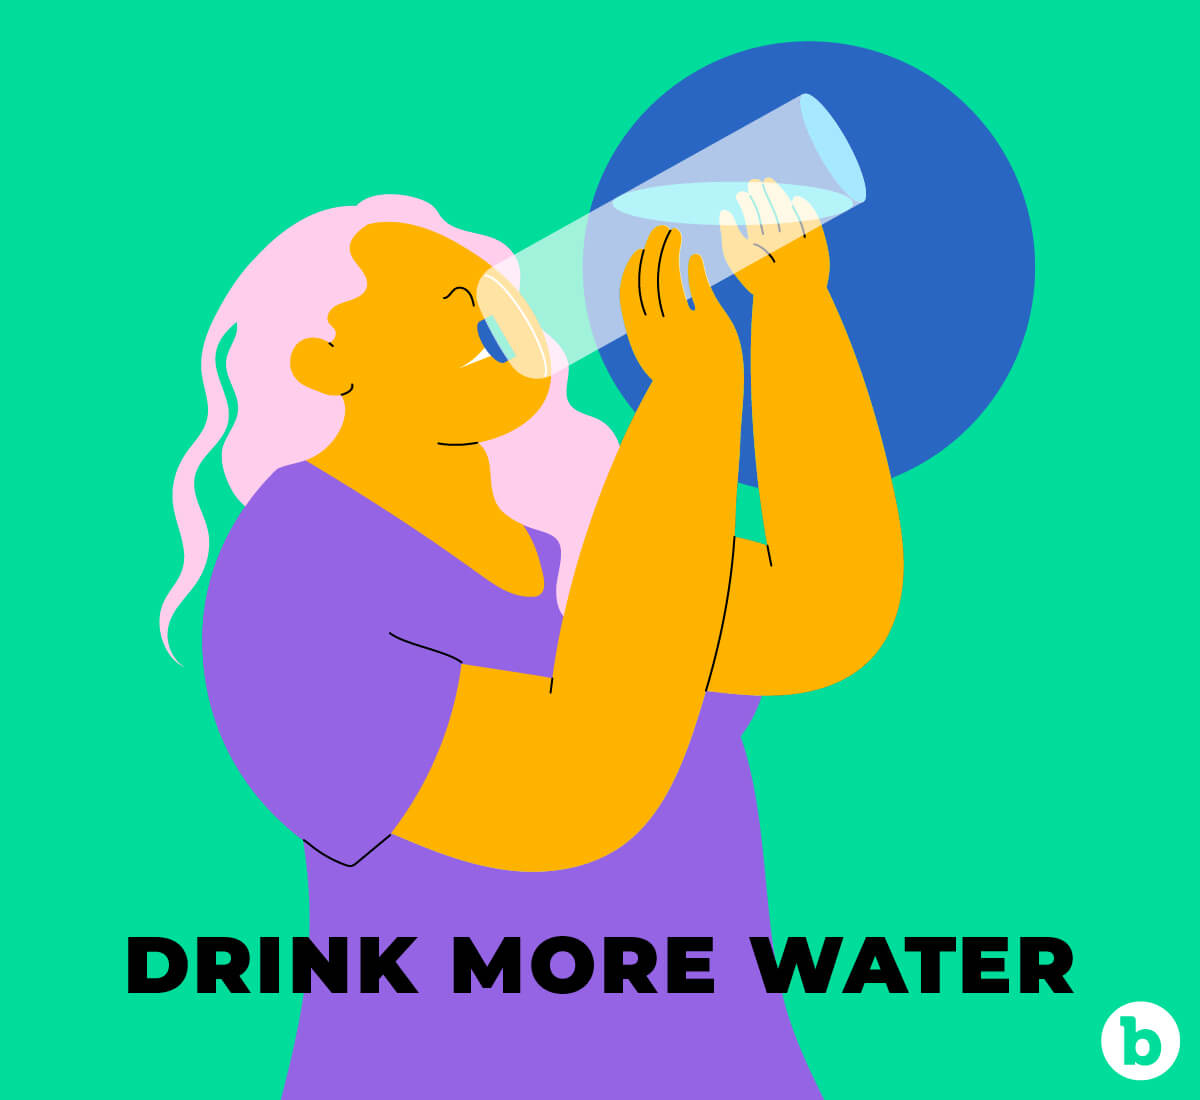 Drinking more water should be a general resolution for 2021 as well as a booty resolution